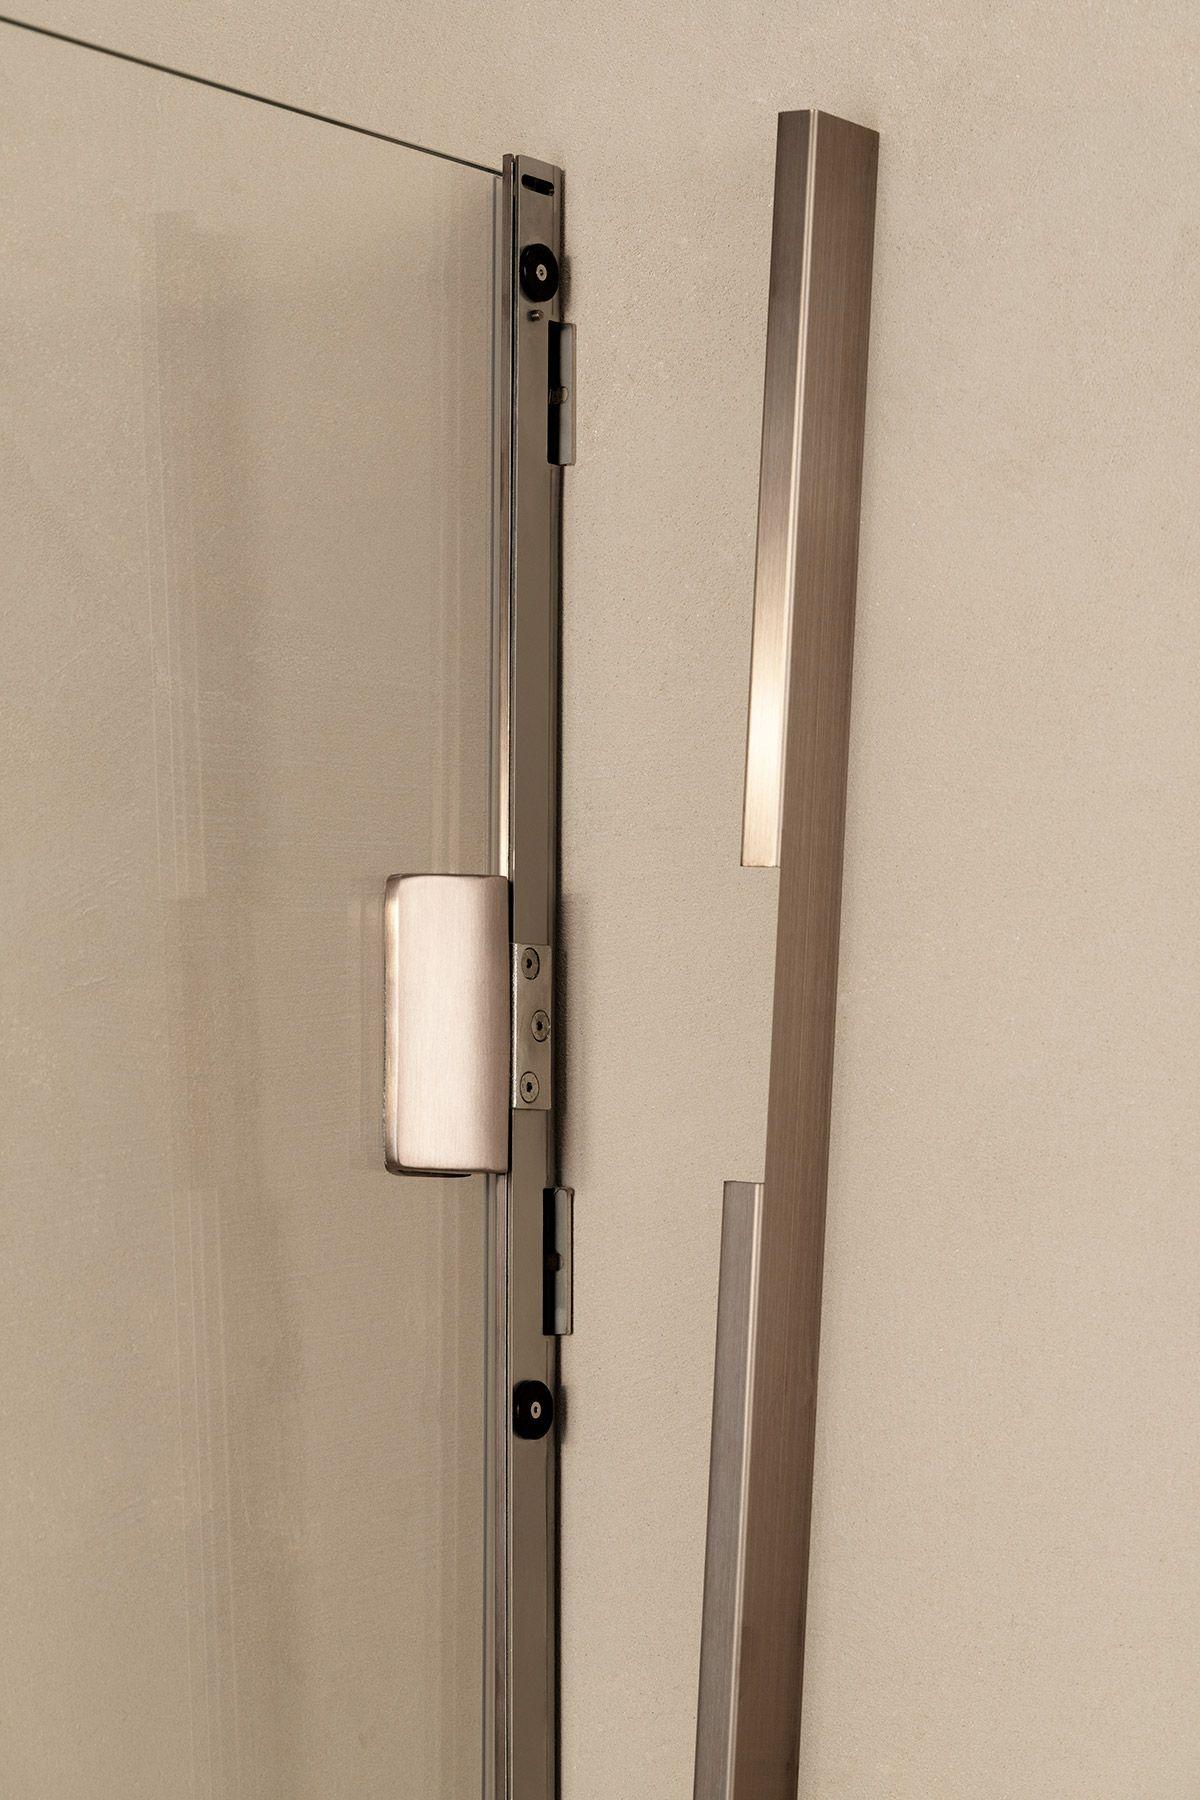 Wall attachment masked by a stainless steel cover